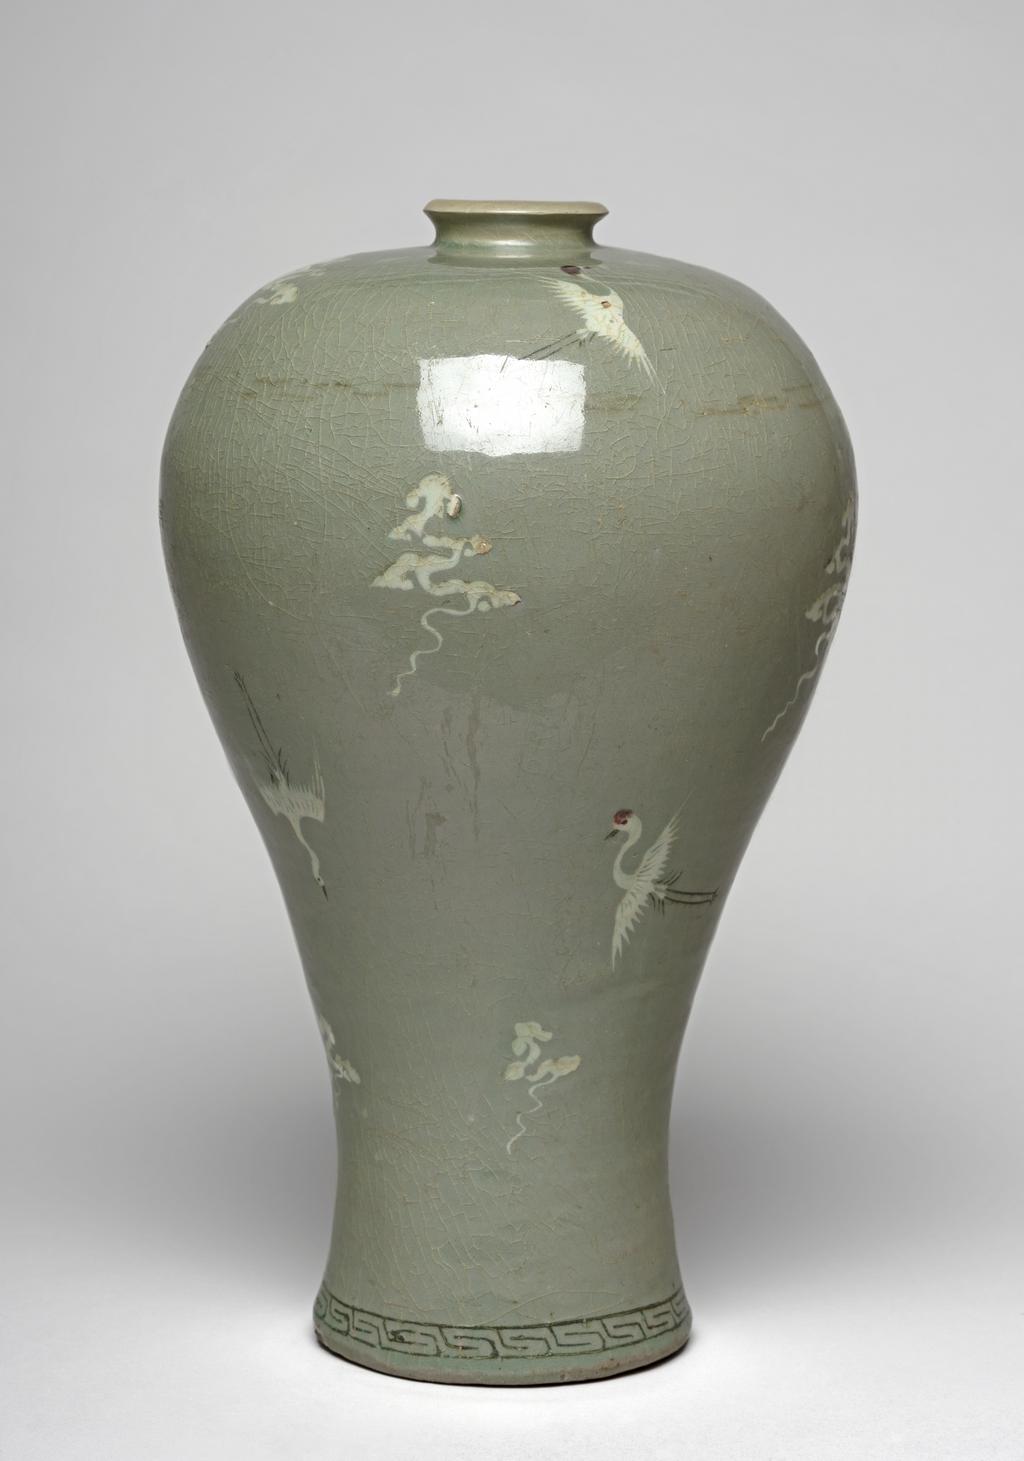 An image of Maebyong. Vase with cranes and clouds. Unknown pottery, Korea, North Cholla province. Yuch'on-ri, Puan. This maebyong-shaped vase has a wide almost flat shoulder and a full body that gradually tapers towards the spreading foot. The foot-rim is broad and shallow. The everted mouth is restored and does not correspond to the original form, which would have been of angled cup shape. A band of key-fret is inlaid in black slip around the base. Cranes and cloud motifs are sparsely arranged over the whole vessel with a lot of breathing space between; they are inlaid in black and white slip and emphasised with touches of underglaze copper-red, adding accents of brighter colour. The glaze is thinly but unevenly applied; it is glossy and has a pale blue-green tone. The whole surface is covered with a fine crackle. The foot shows traces of fire-clay spurs. Stoneware, thrown, inlaid in black and white slip, with details painted in copper-red, and celadon-glazed. Height, whole, 30.6 cm, diameter, rim, 4.8 cm, diameter, foot, 10.0 cm, circa 1150-1200. Koryo Dynasty. Notes: Vessels such as this one were used for wine.